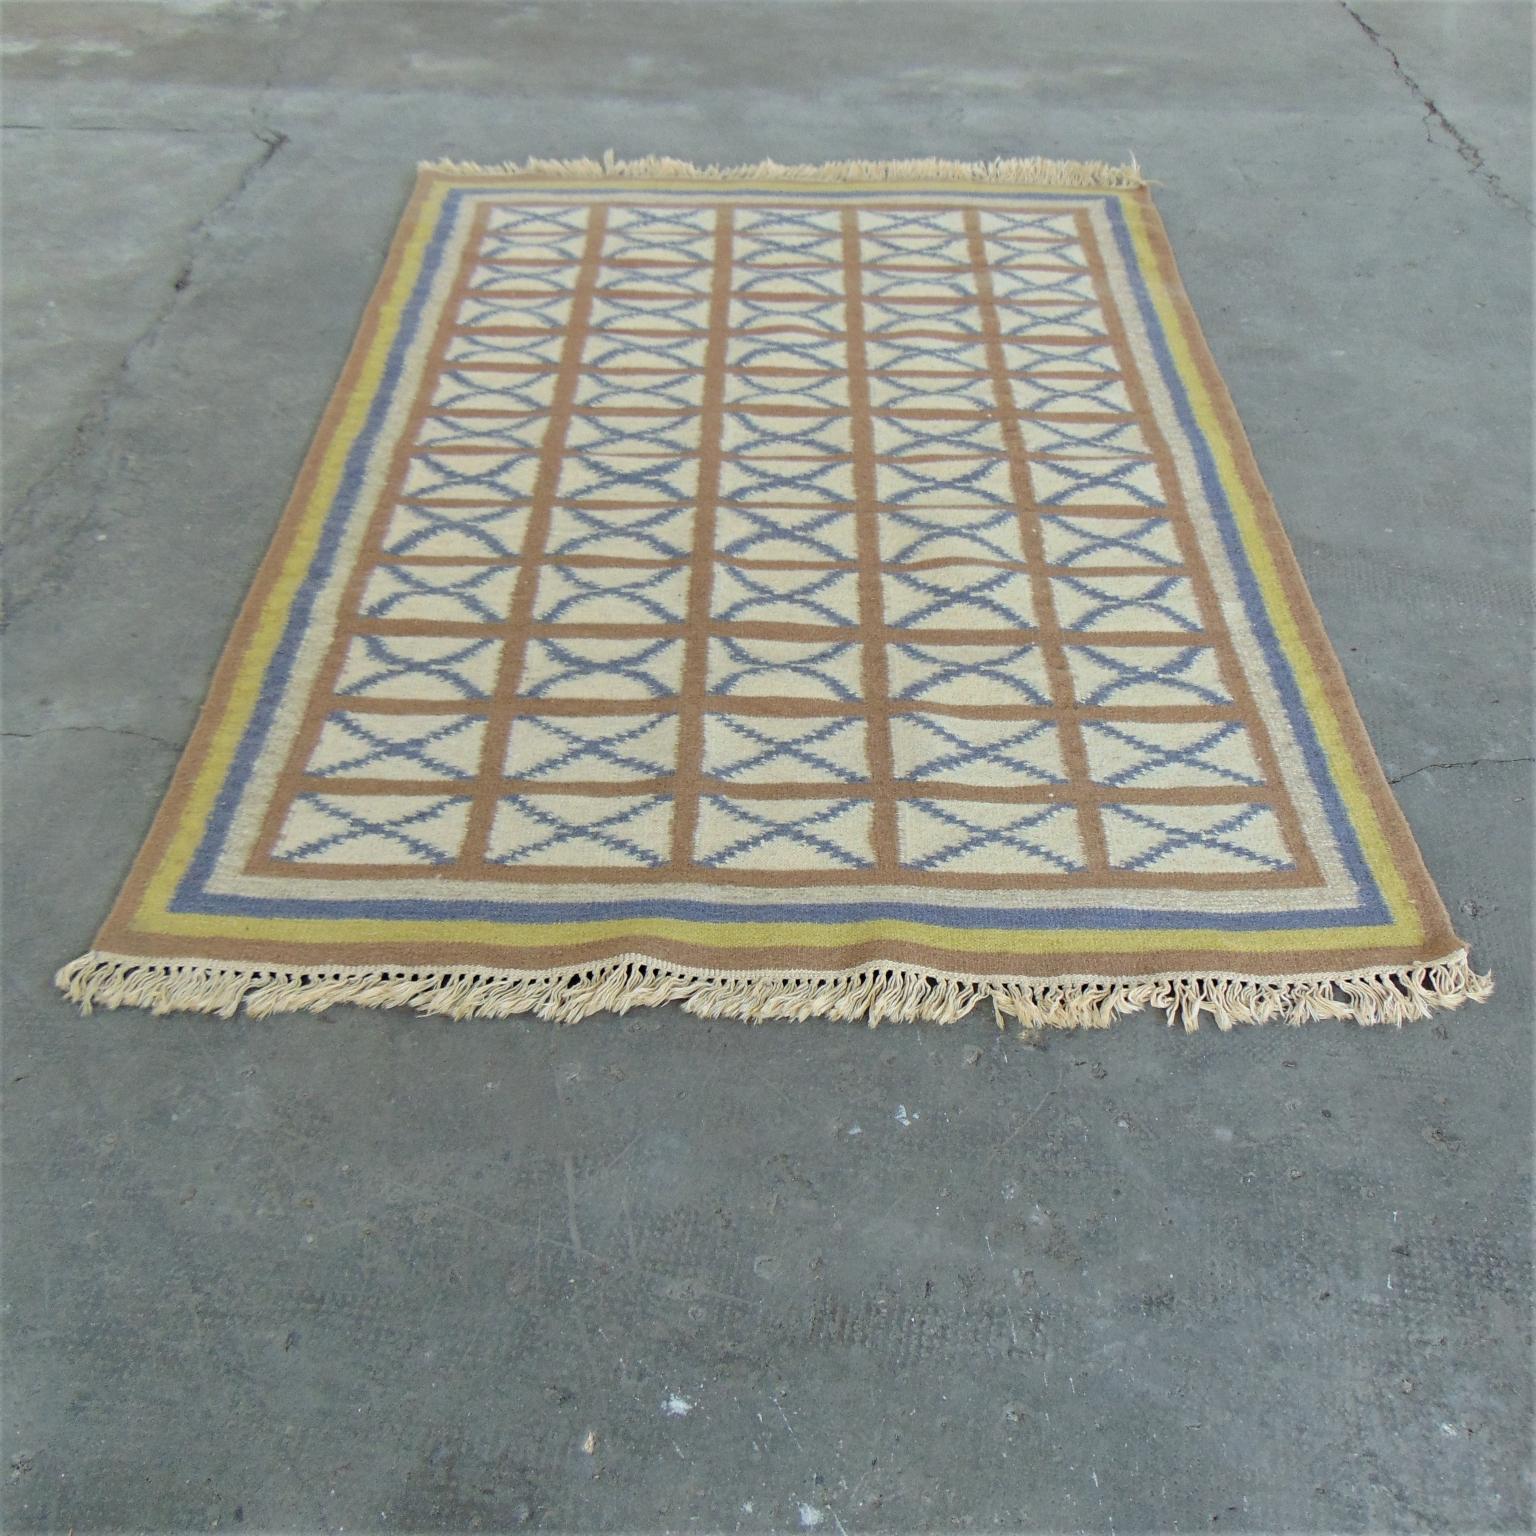 This vintage carpet was imported from India to Italy in the mid-1970s. It is handwoven, with a soft blend of warm colors, such as yellow and light brown on an ivory background, highlighted by a blue pattern. All natural dyes. For an entrance hall, a